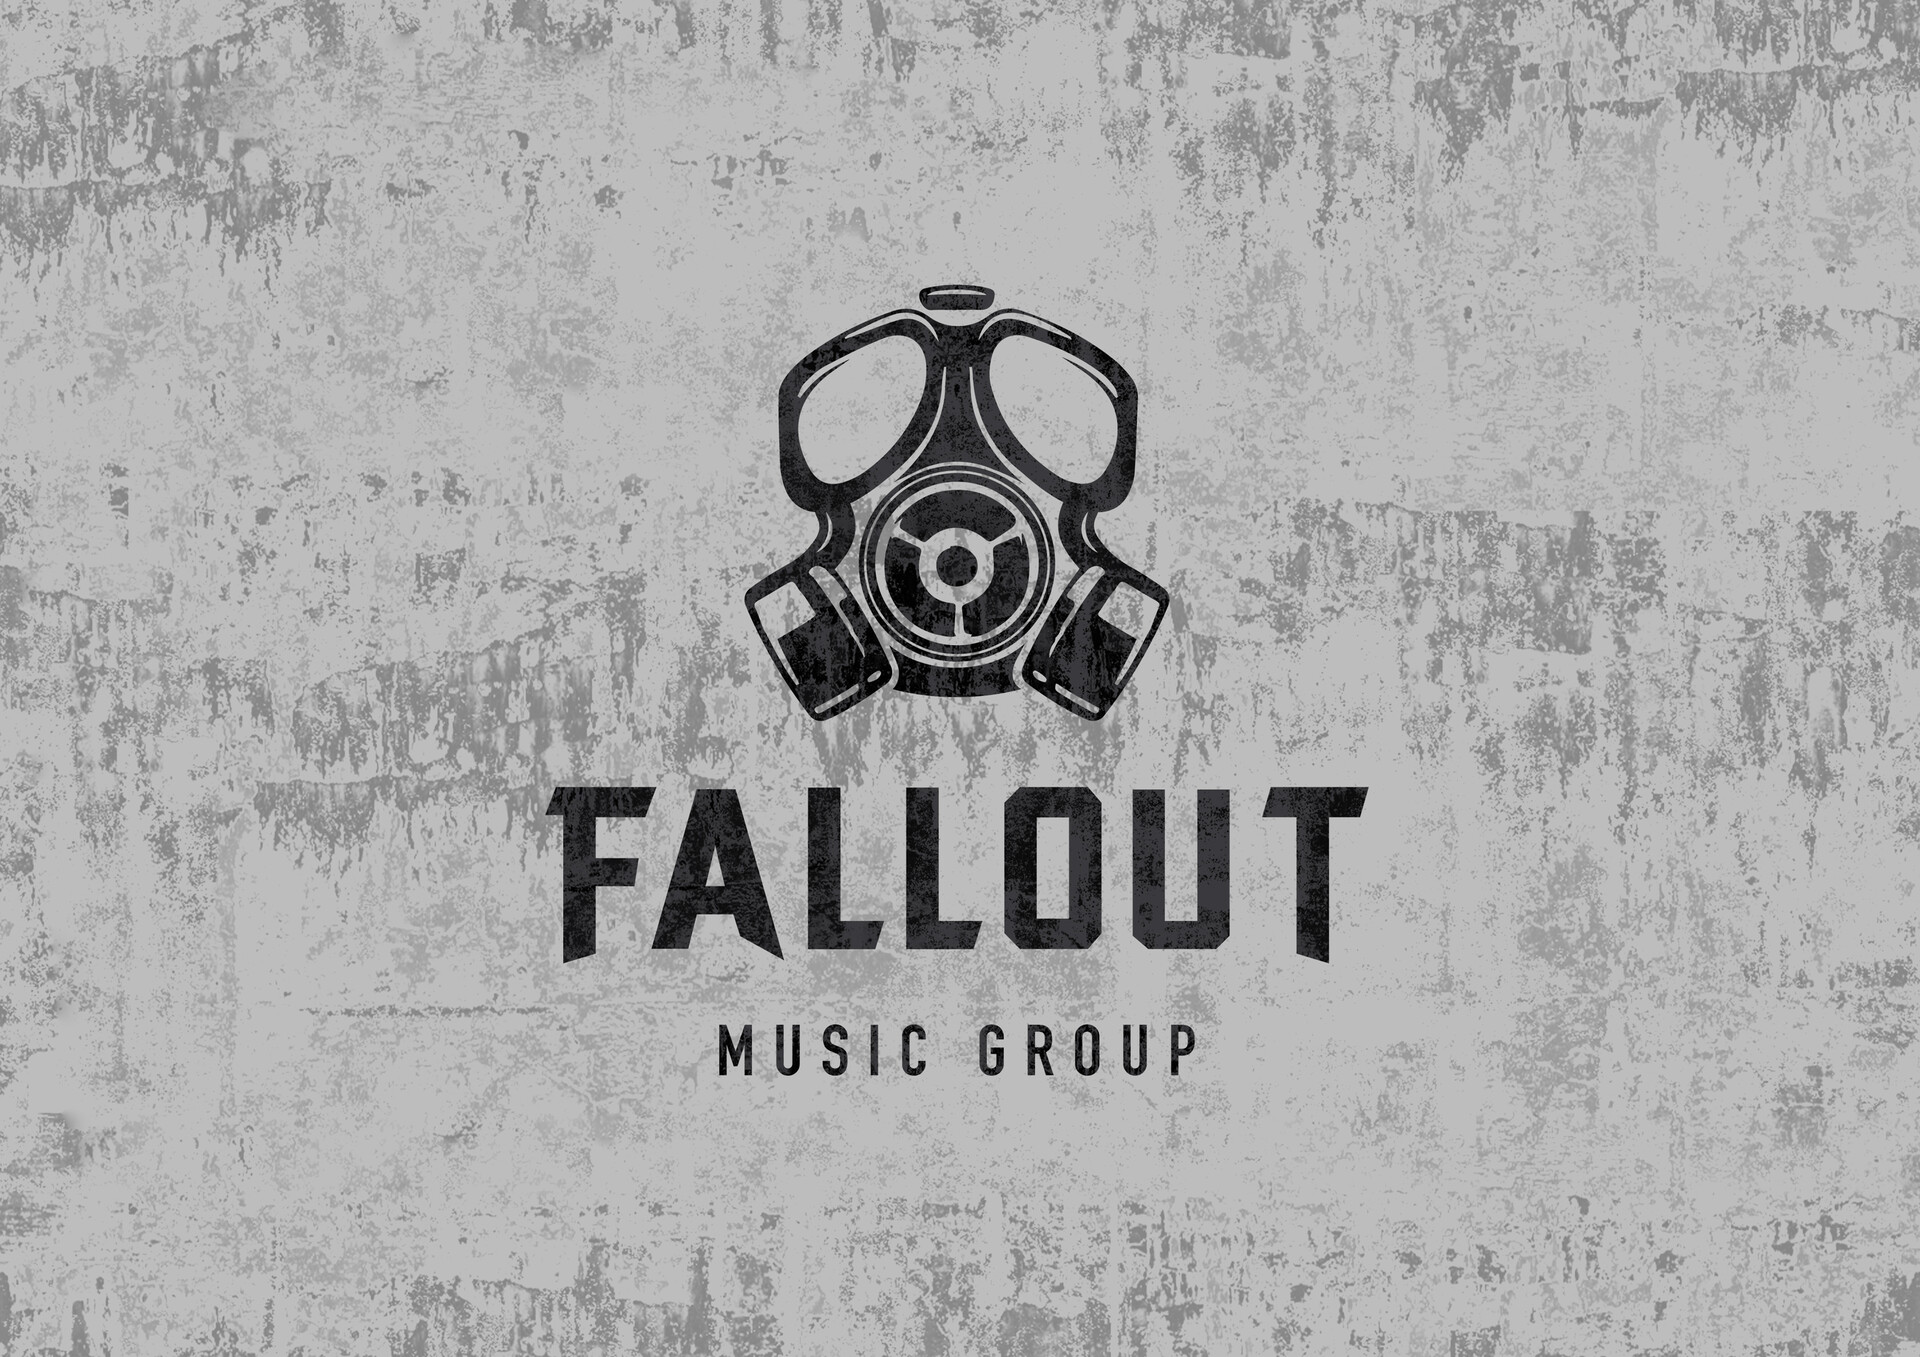 Fallout 3 music in fallout 4 фото 6